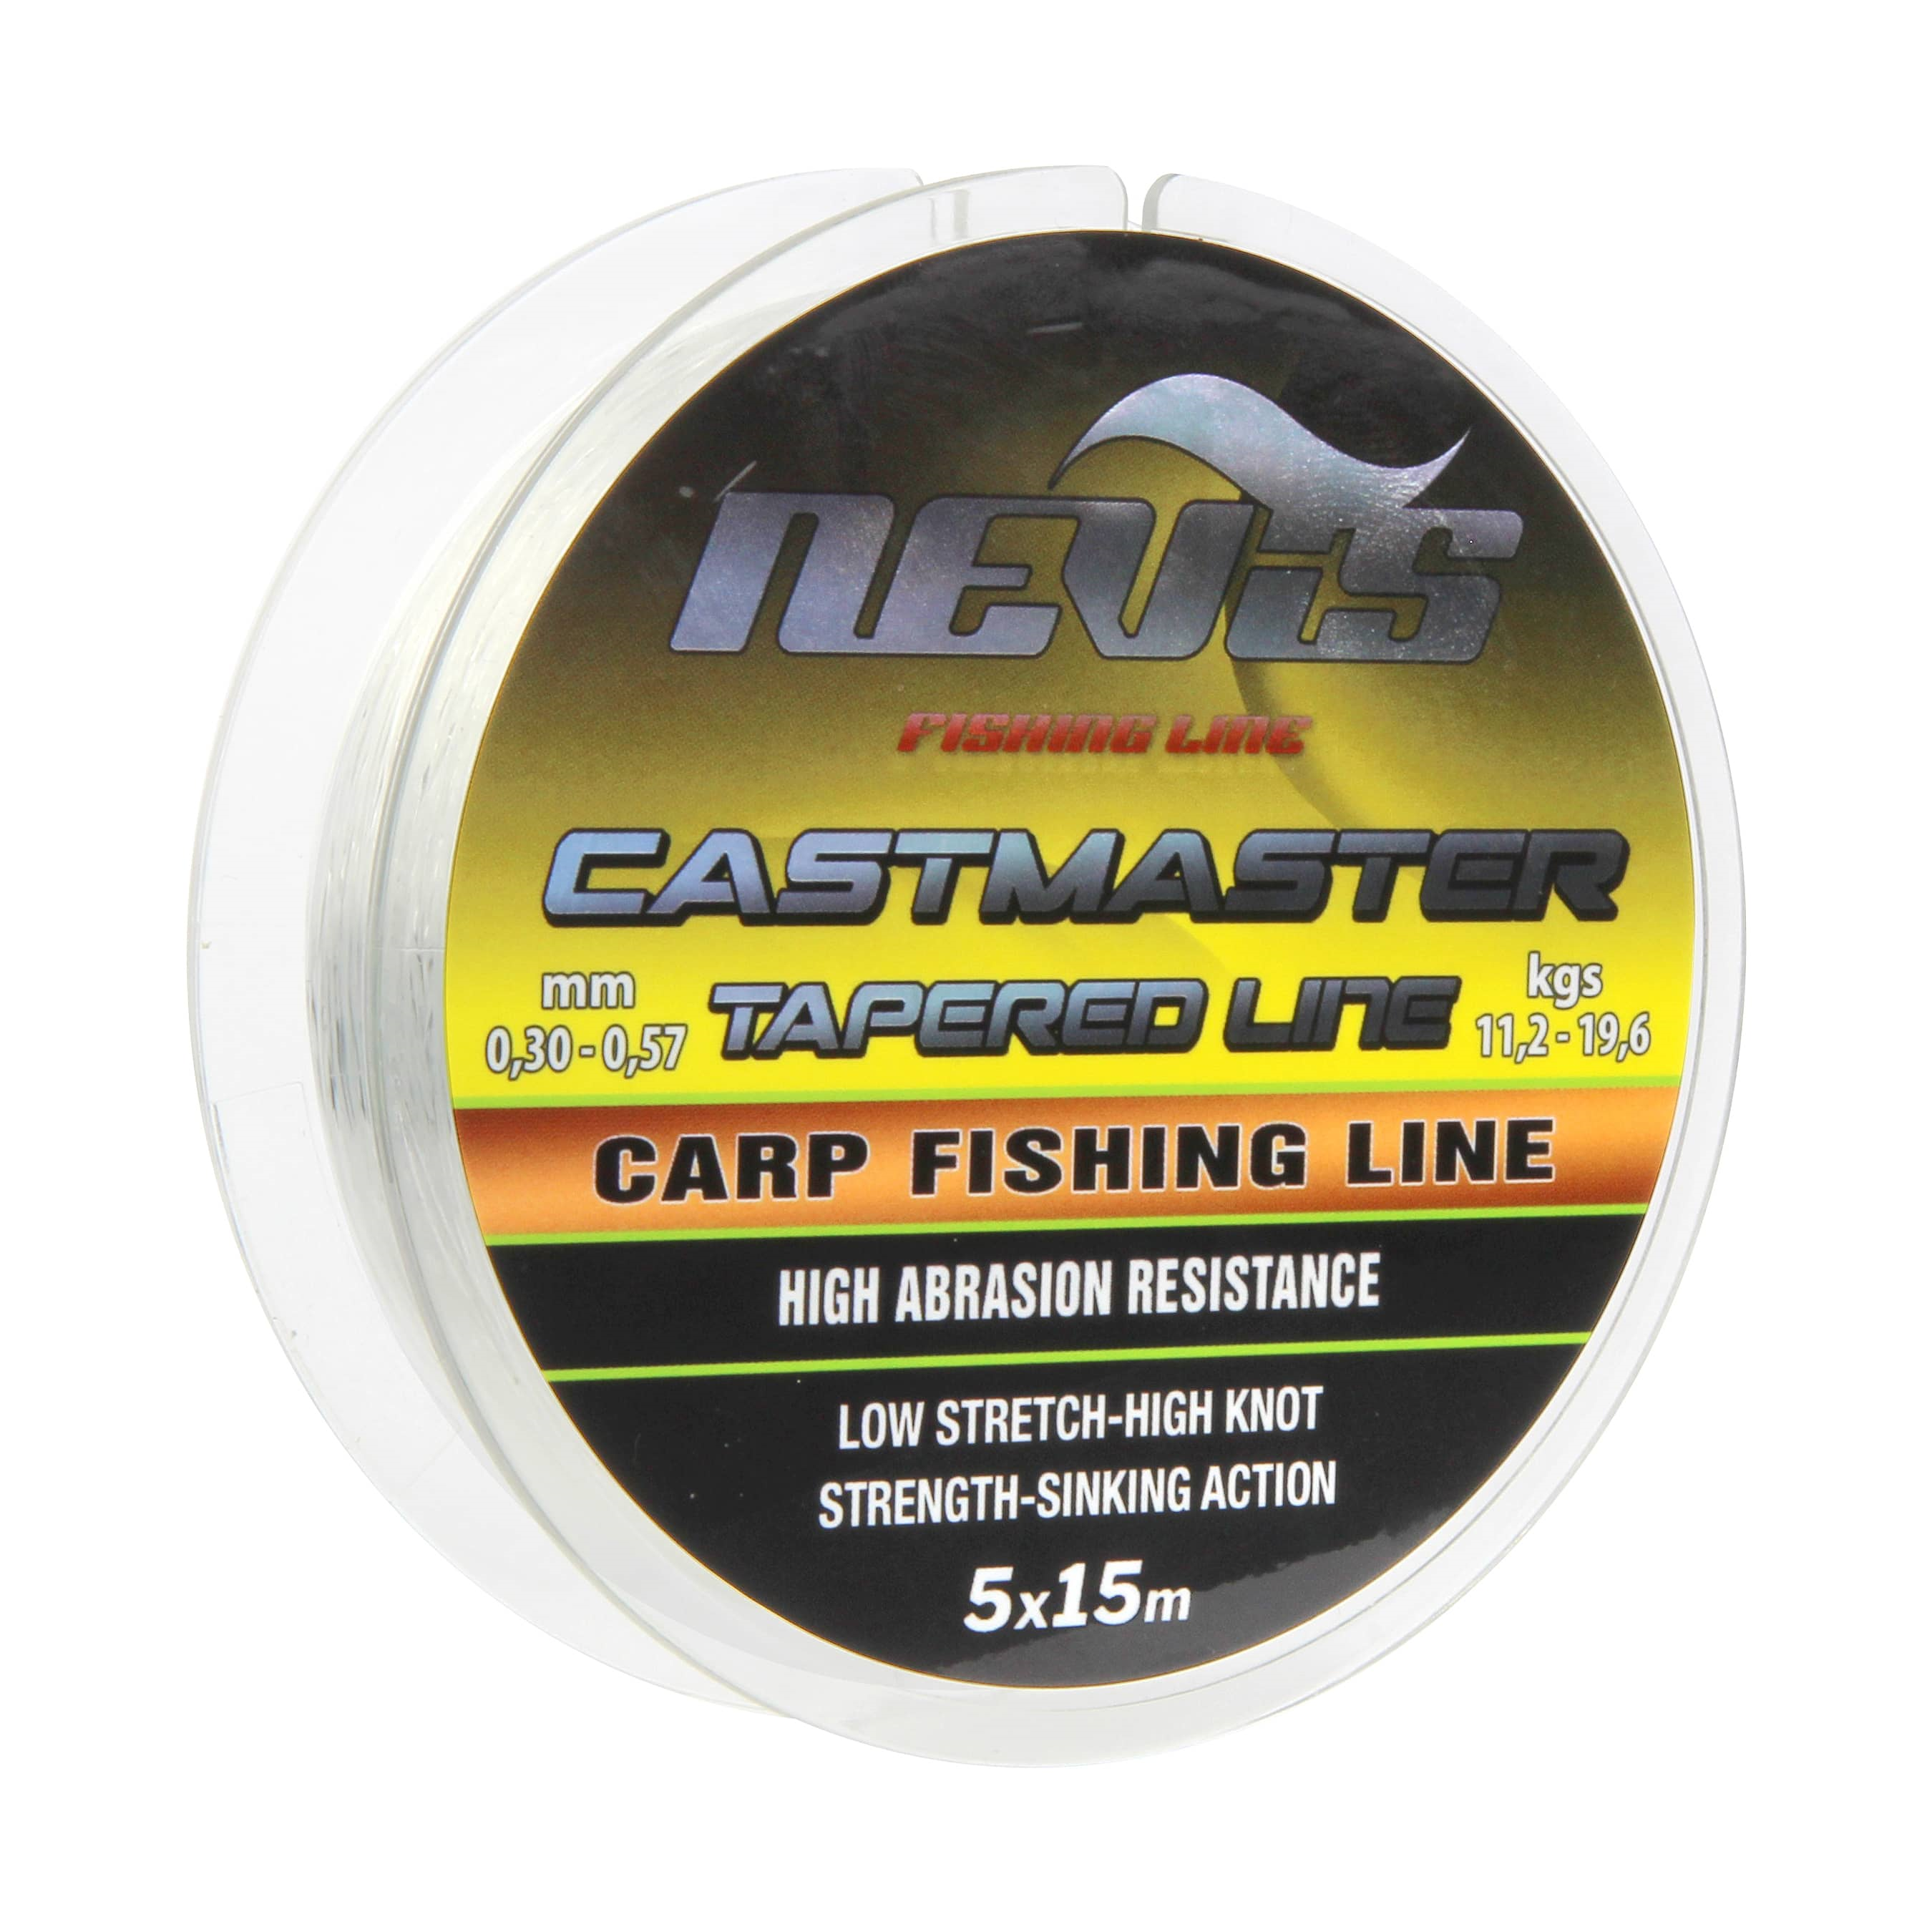 NEVIS CASTMASTER TAPERED LINE 5 X15M 0,26-0,57 MM